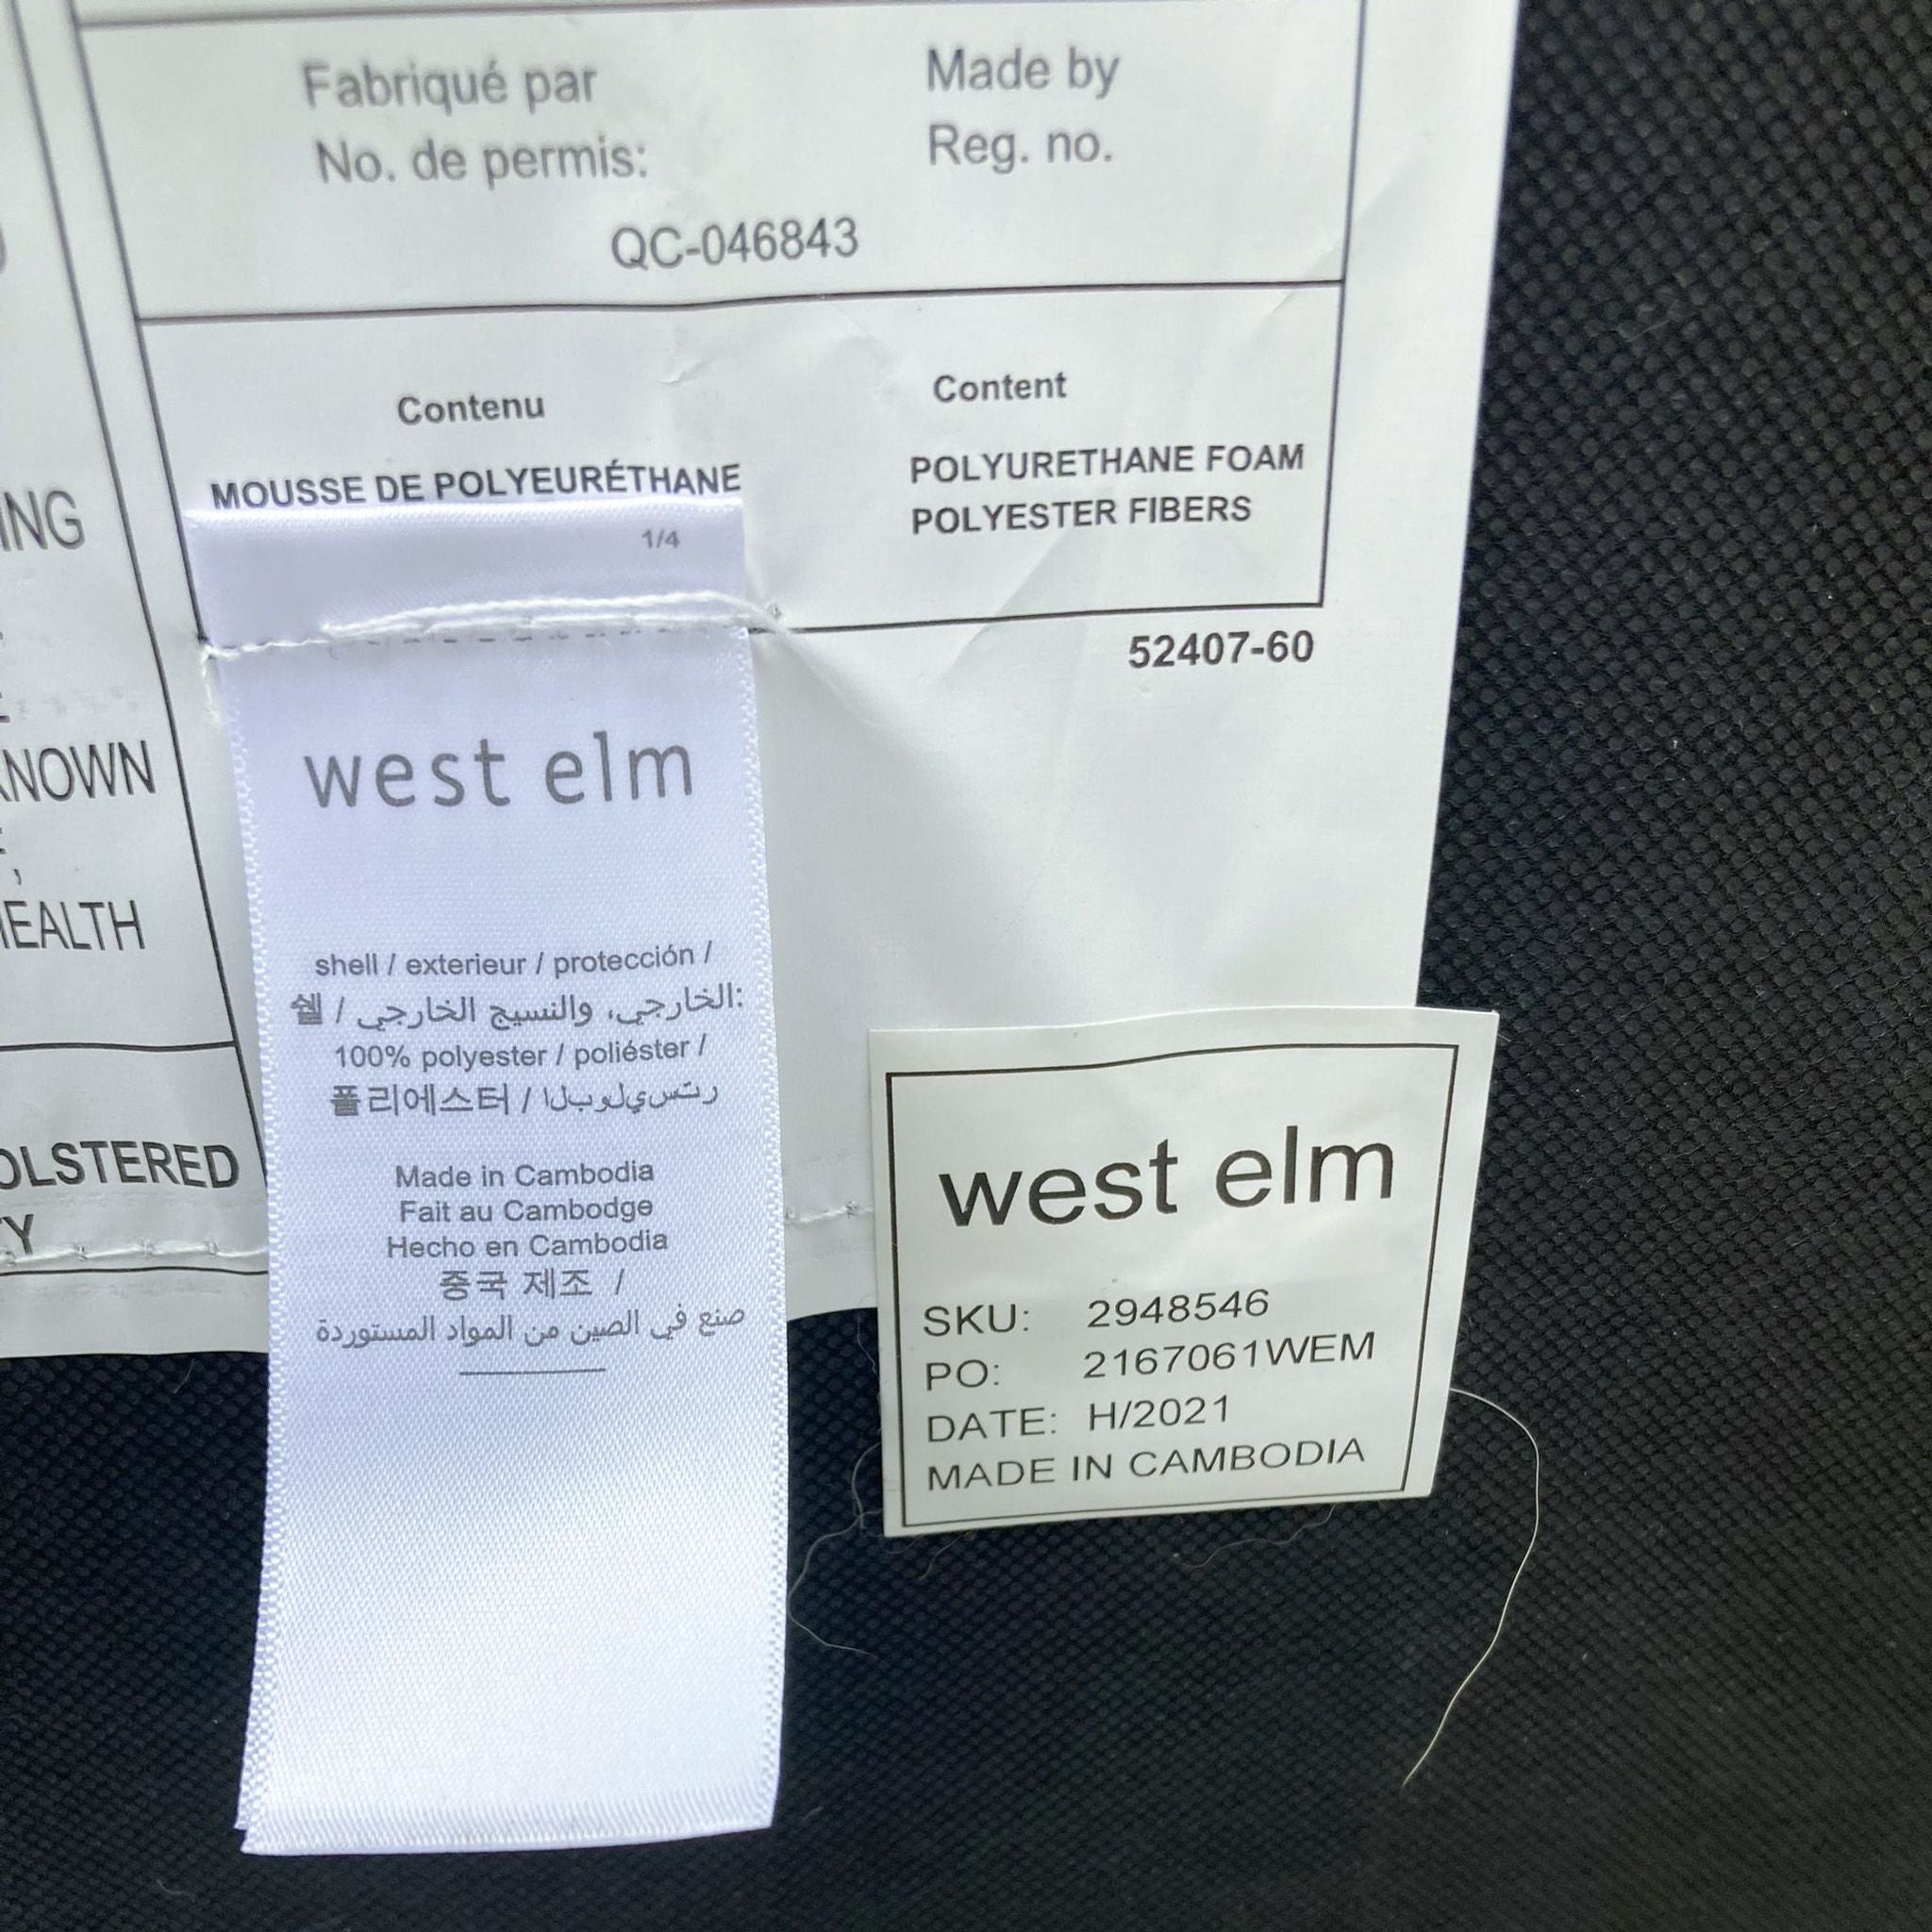 Label with West Elm logo on a grey fabric sofa showing material details and manufacturing information.